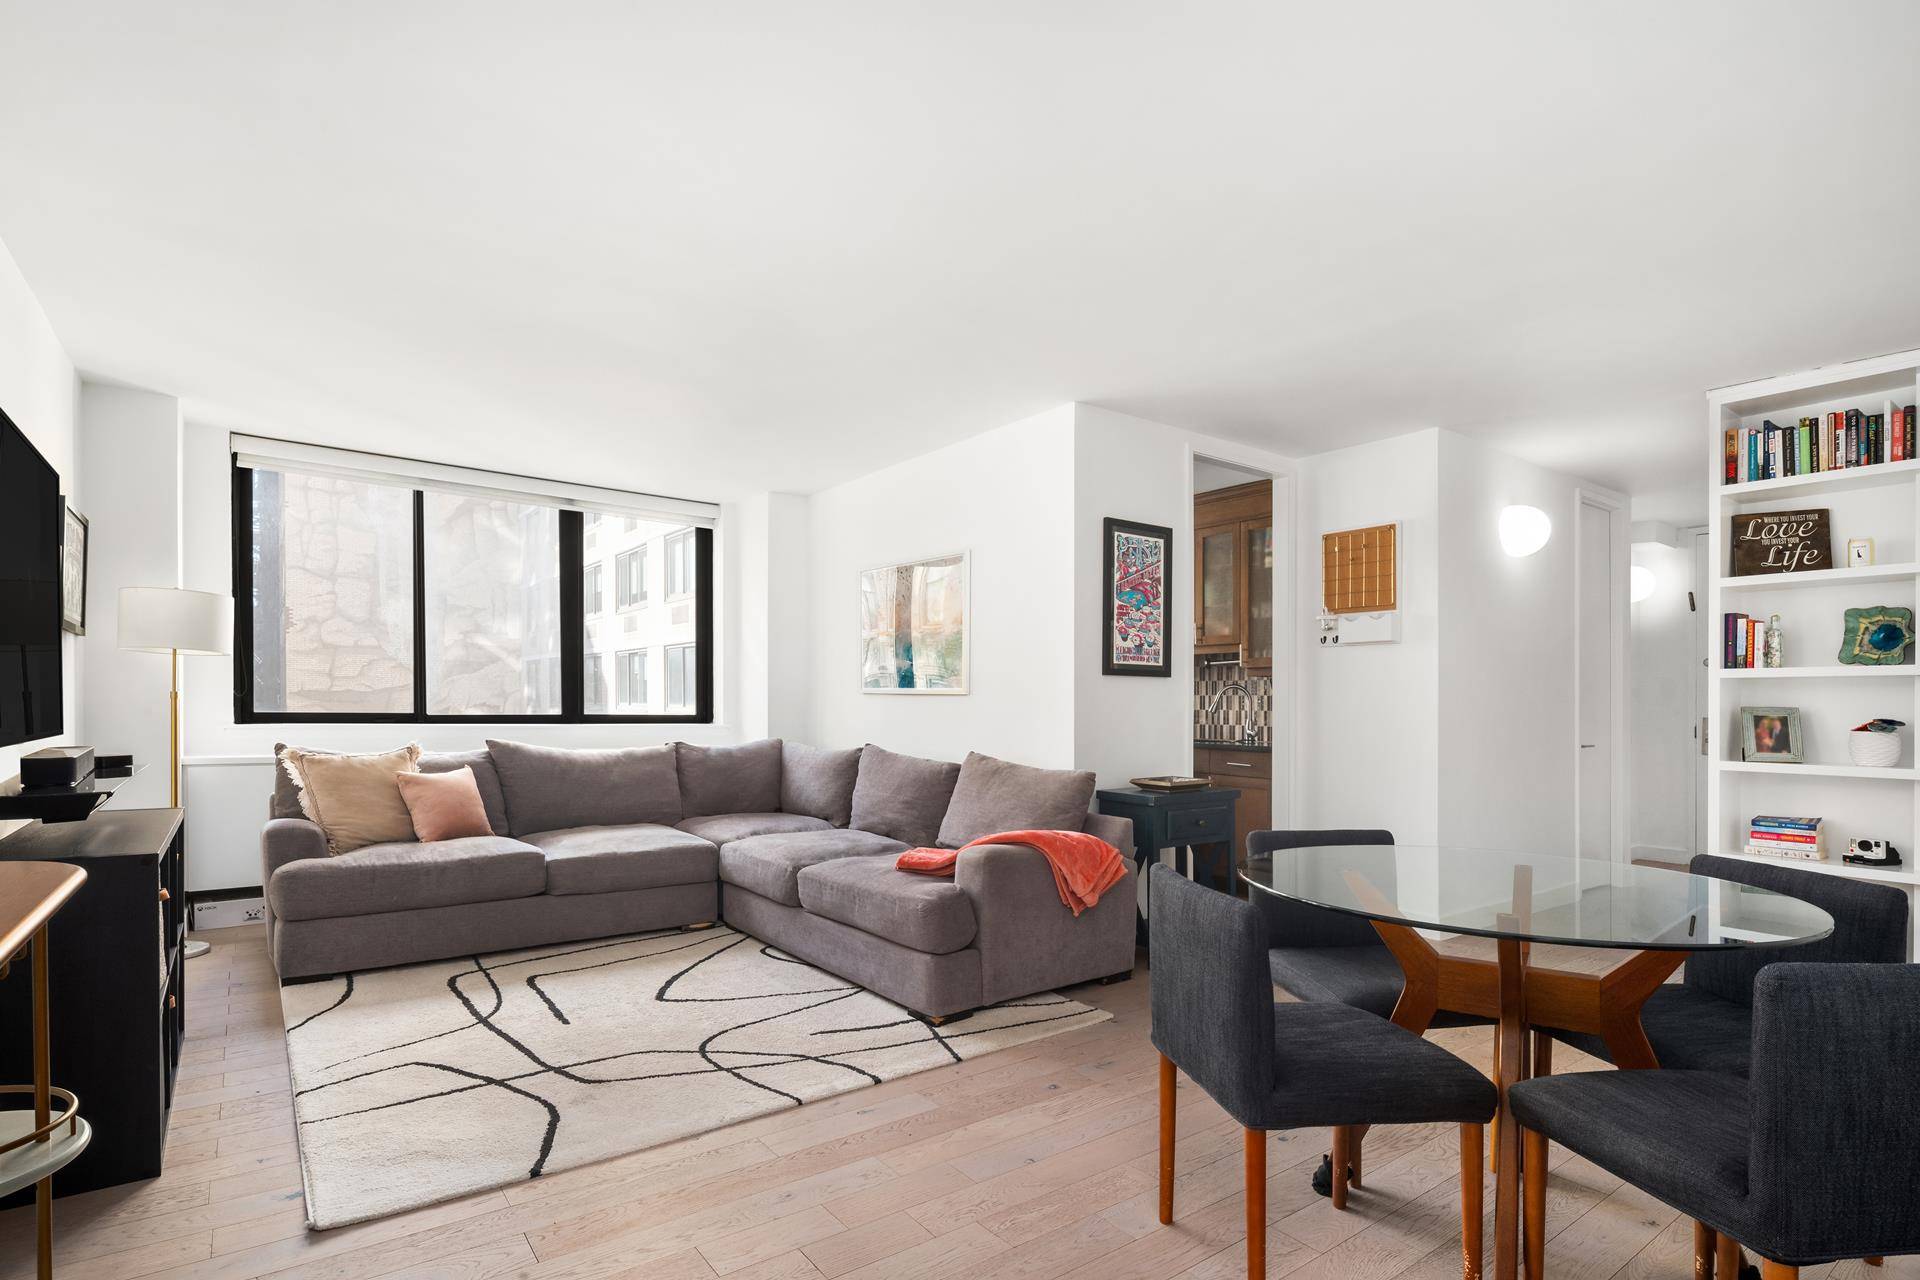 This meticulously designed apartment offers a balanced blend of comfort and great taste with an exceptional layout, providing seamless transitions between living areas.